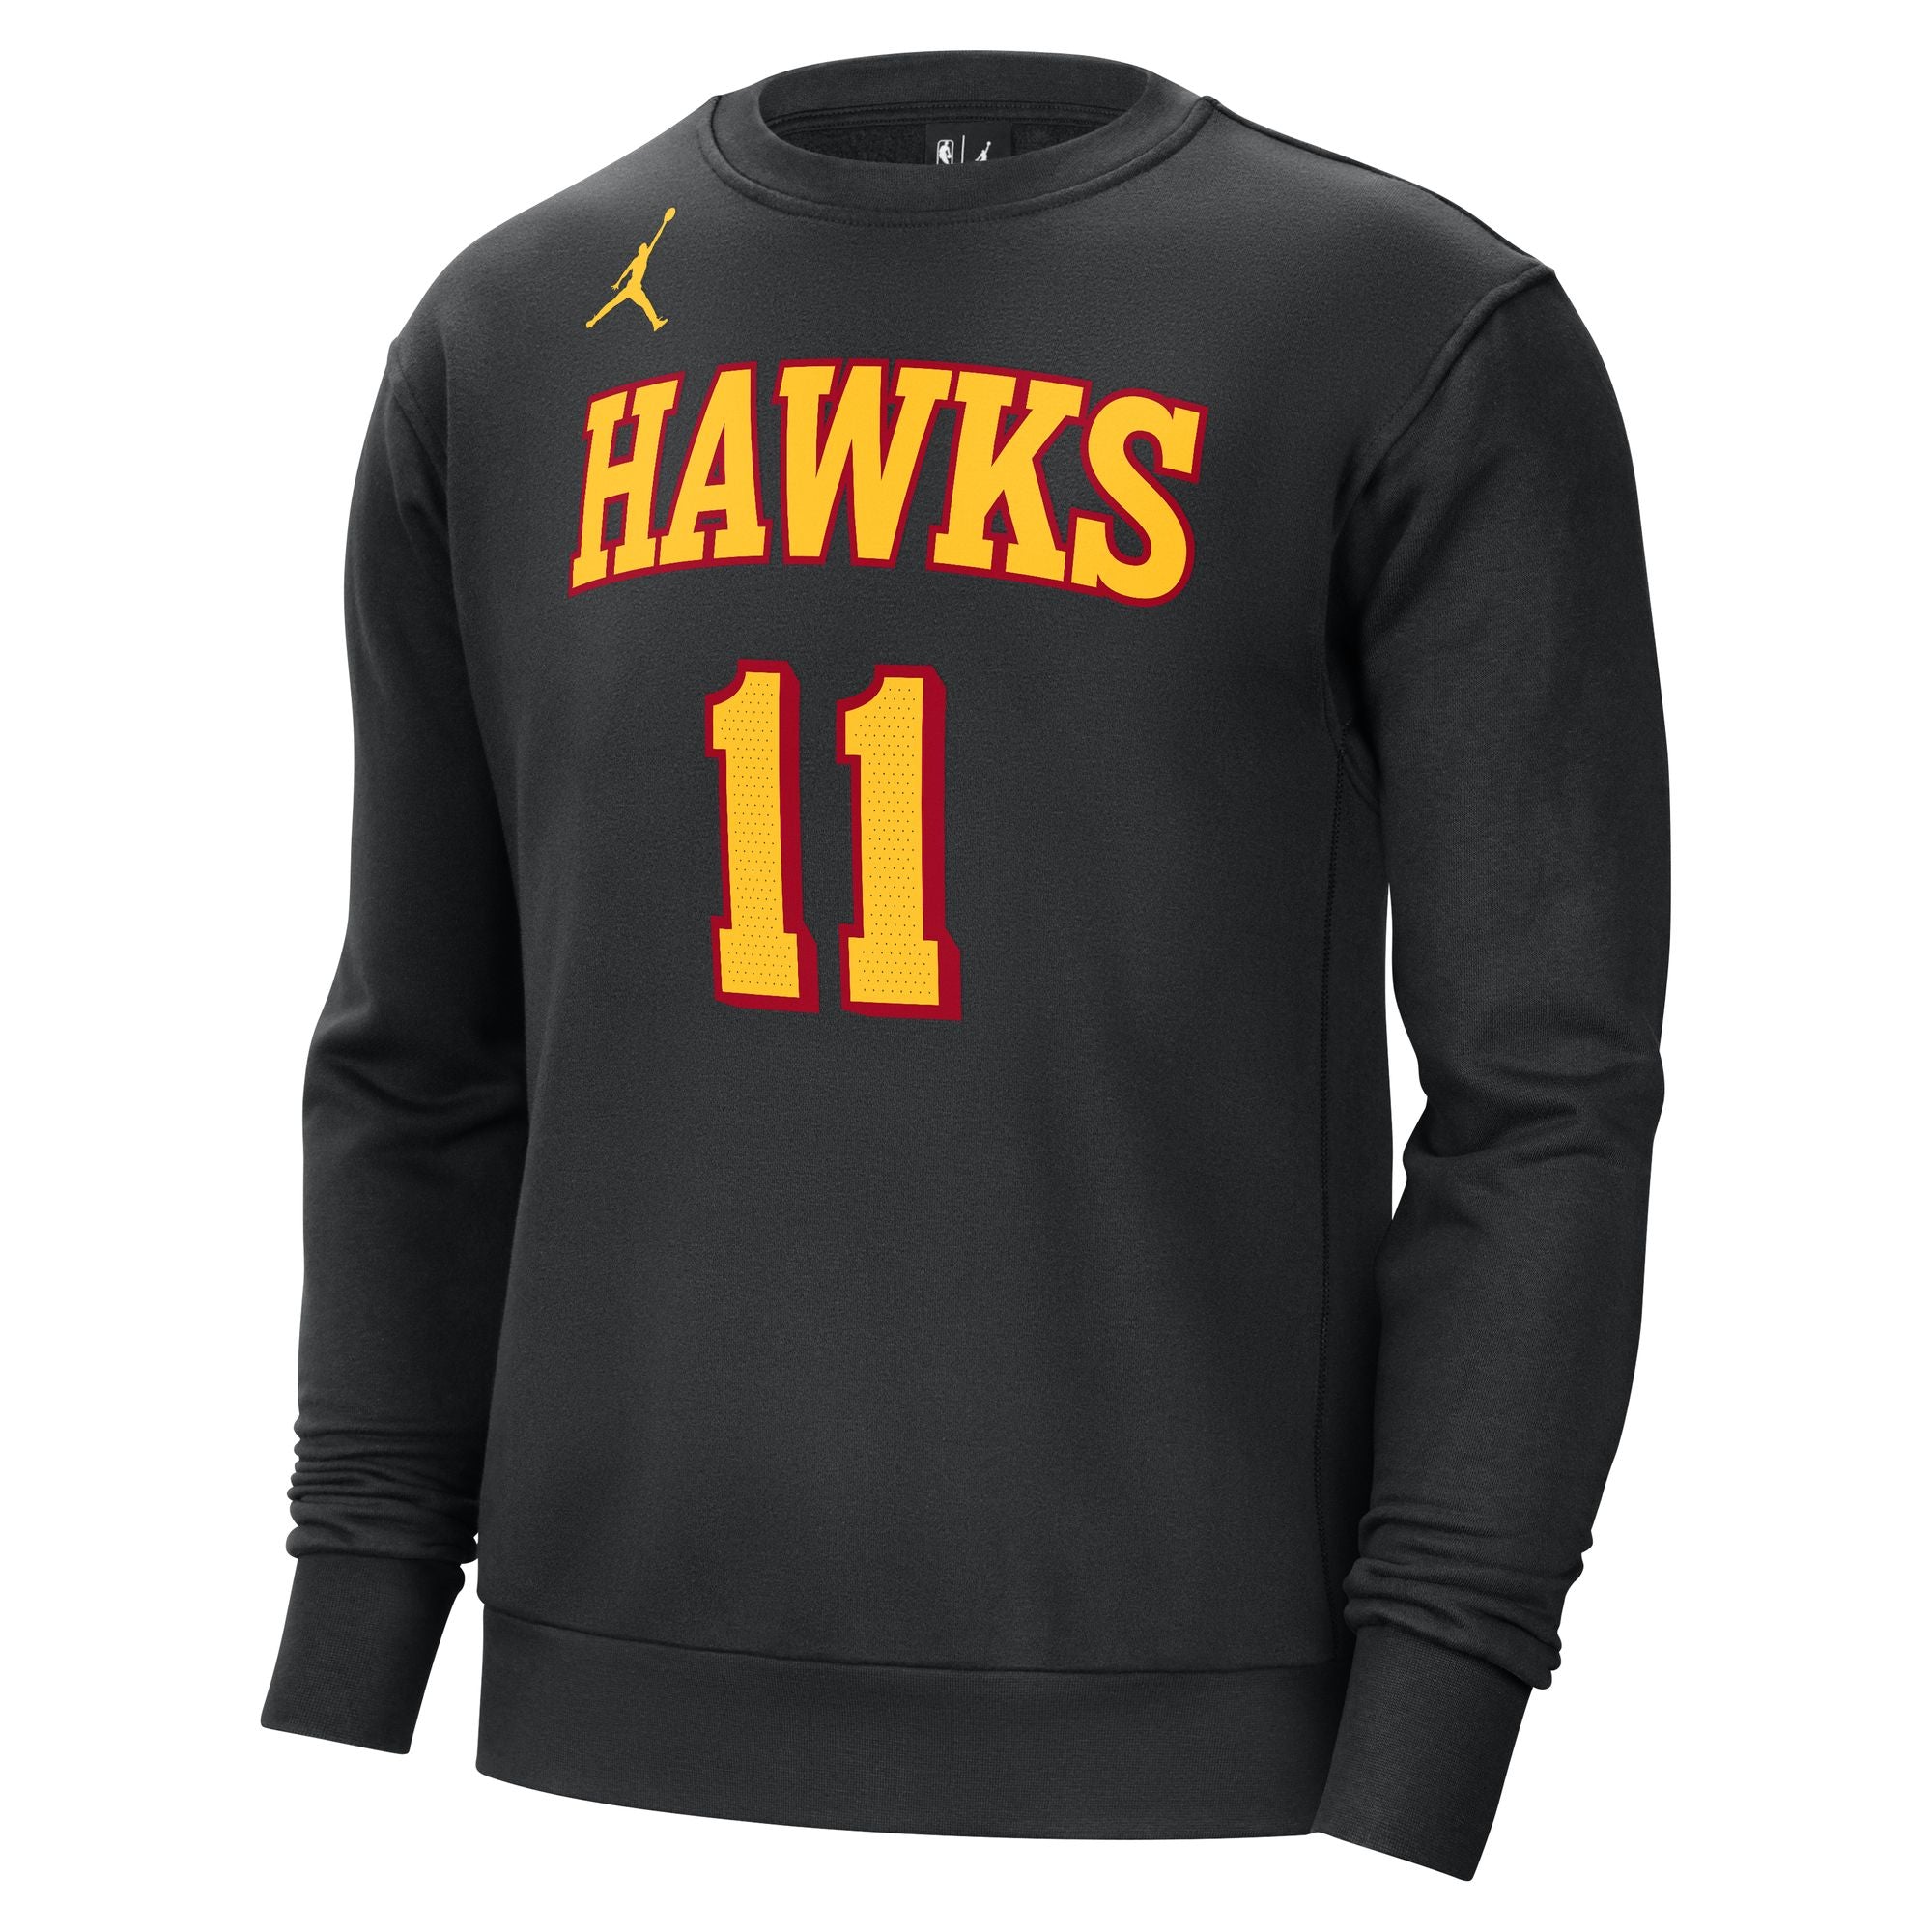 Young Nike Association Edition Authentic Jersey - Hawks Shop